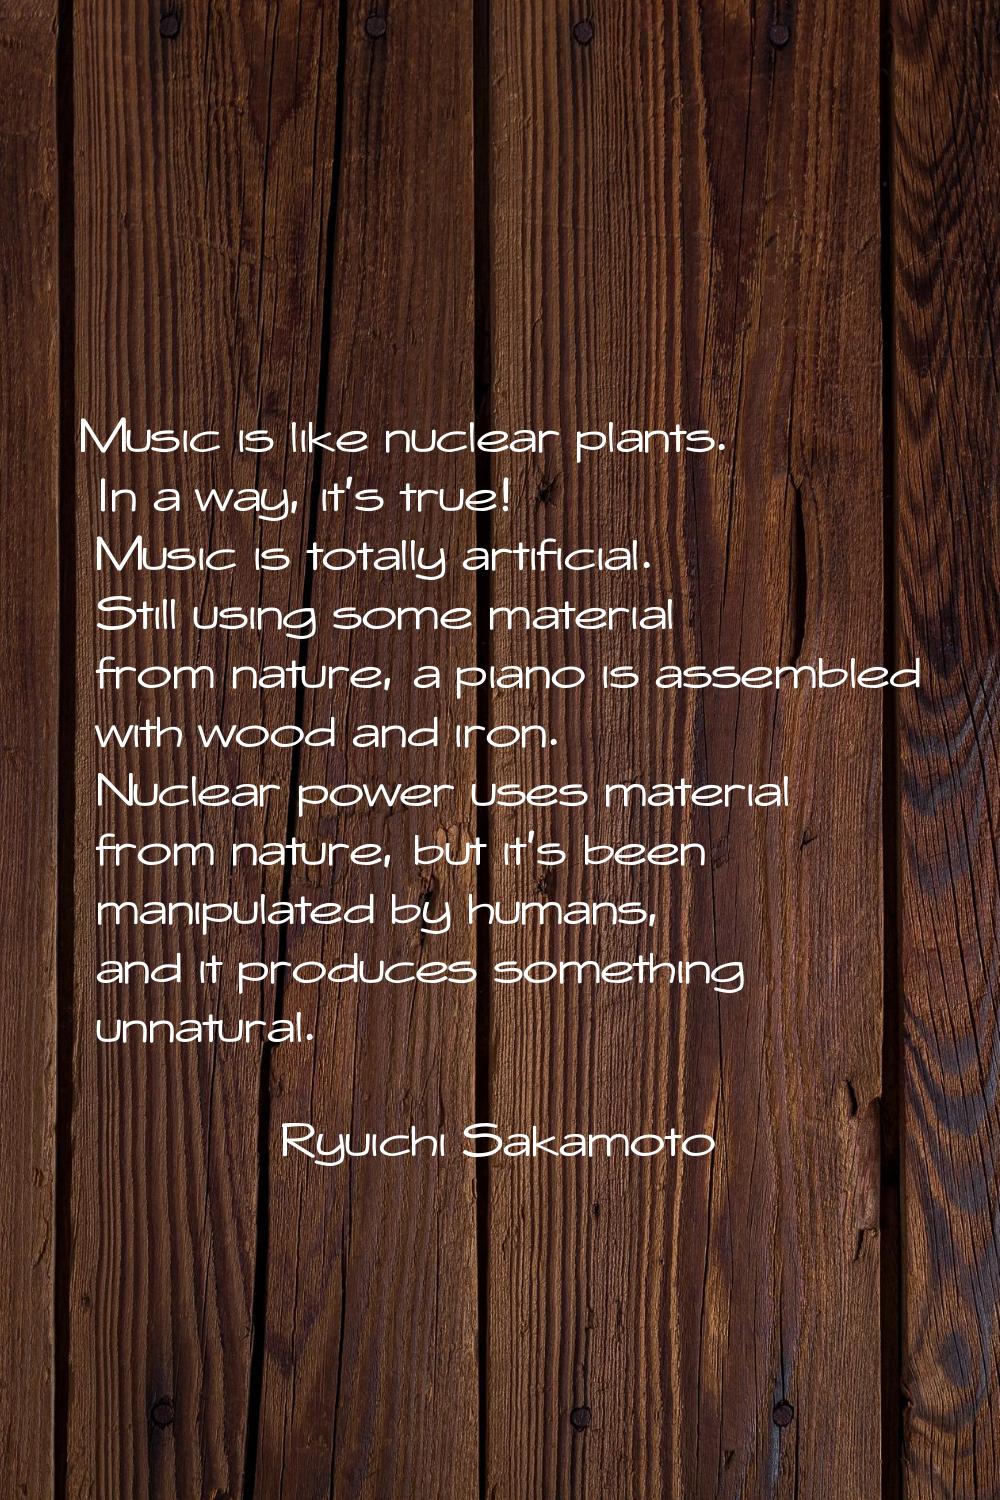 Music is like nuclear plants. In a way, it's true! Music is totally artificial. Still using some ma